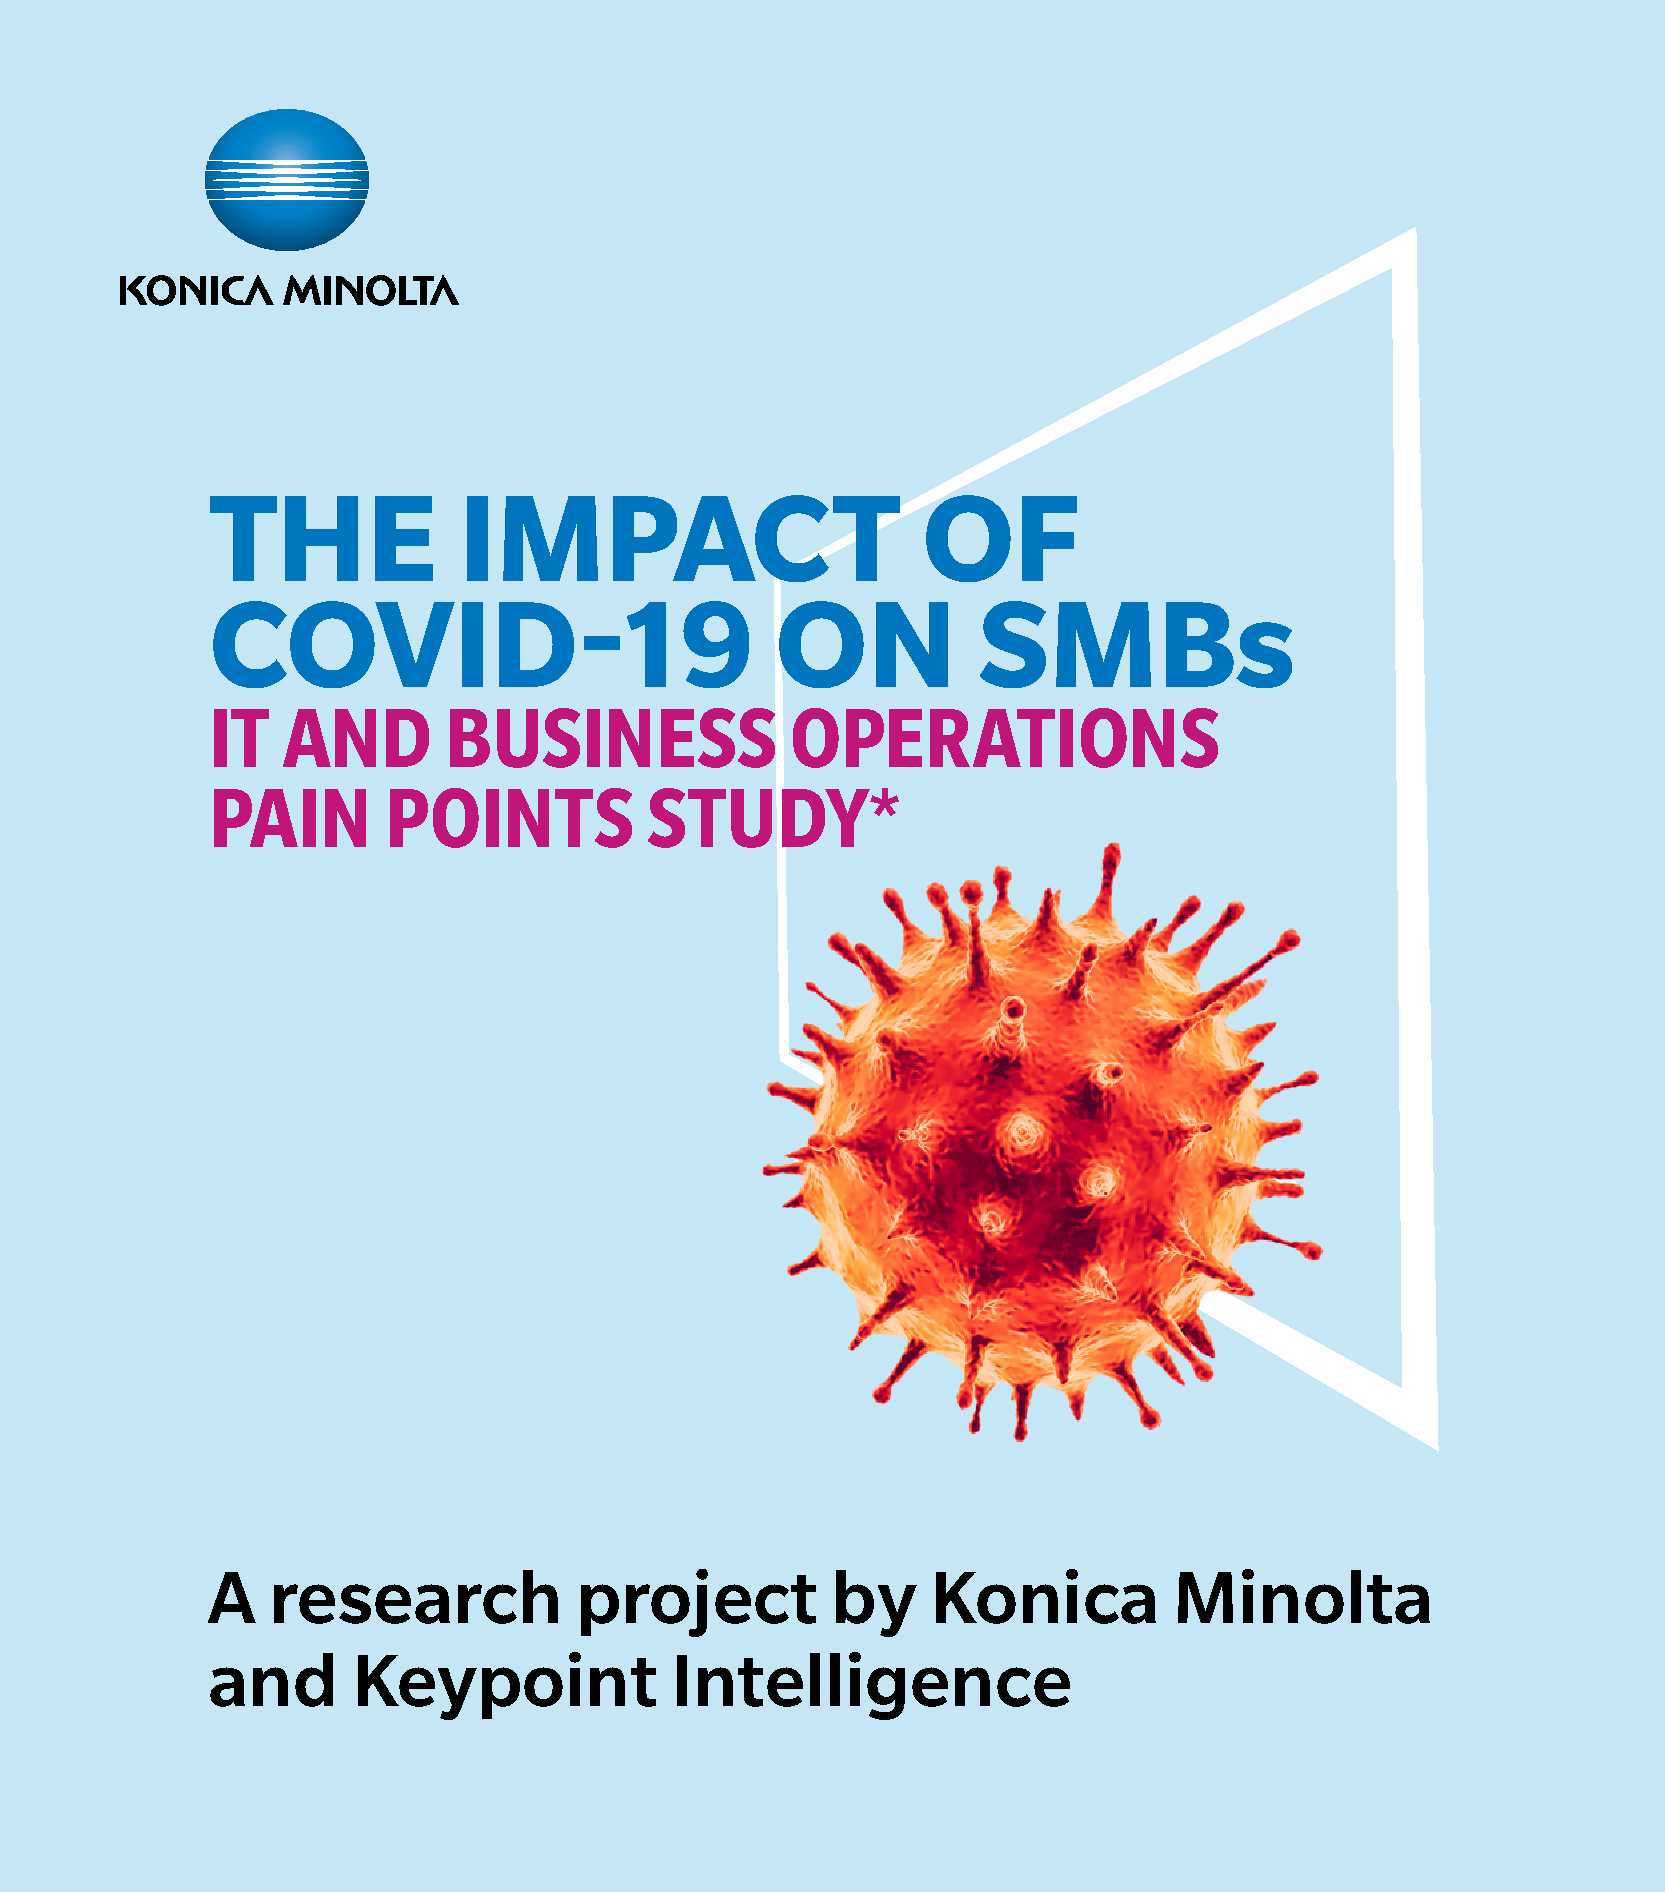 Konica Minolta and Keypoint Intelligence's IT and business operations pain points study reveals the depth of security and remote work challenges during the pandemic.